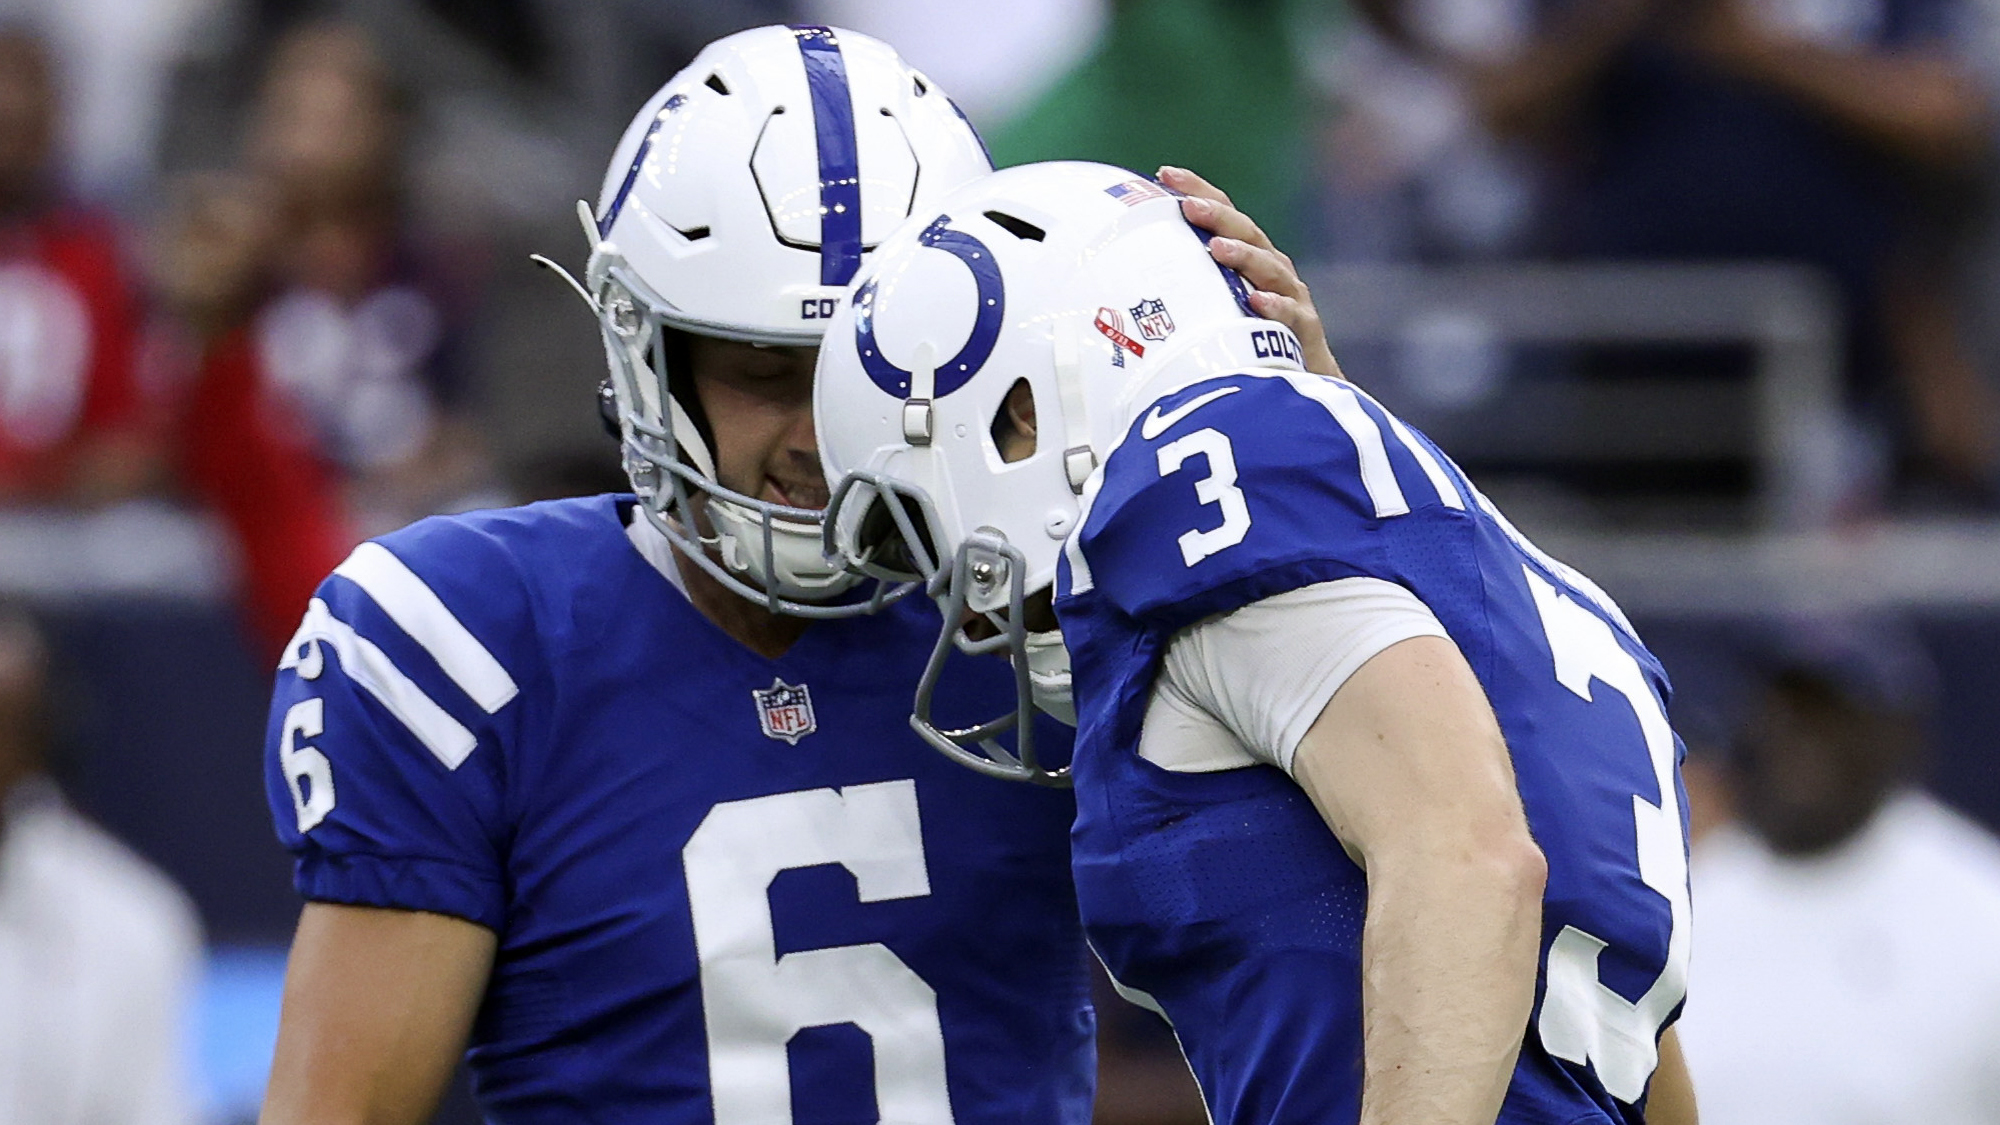 REPORT: Former Colts Kicker Finds New Home